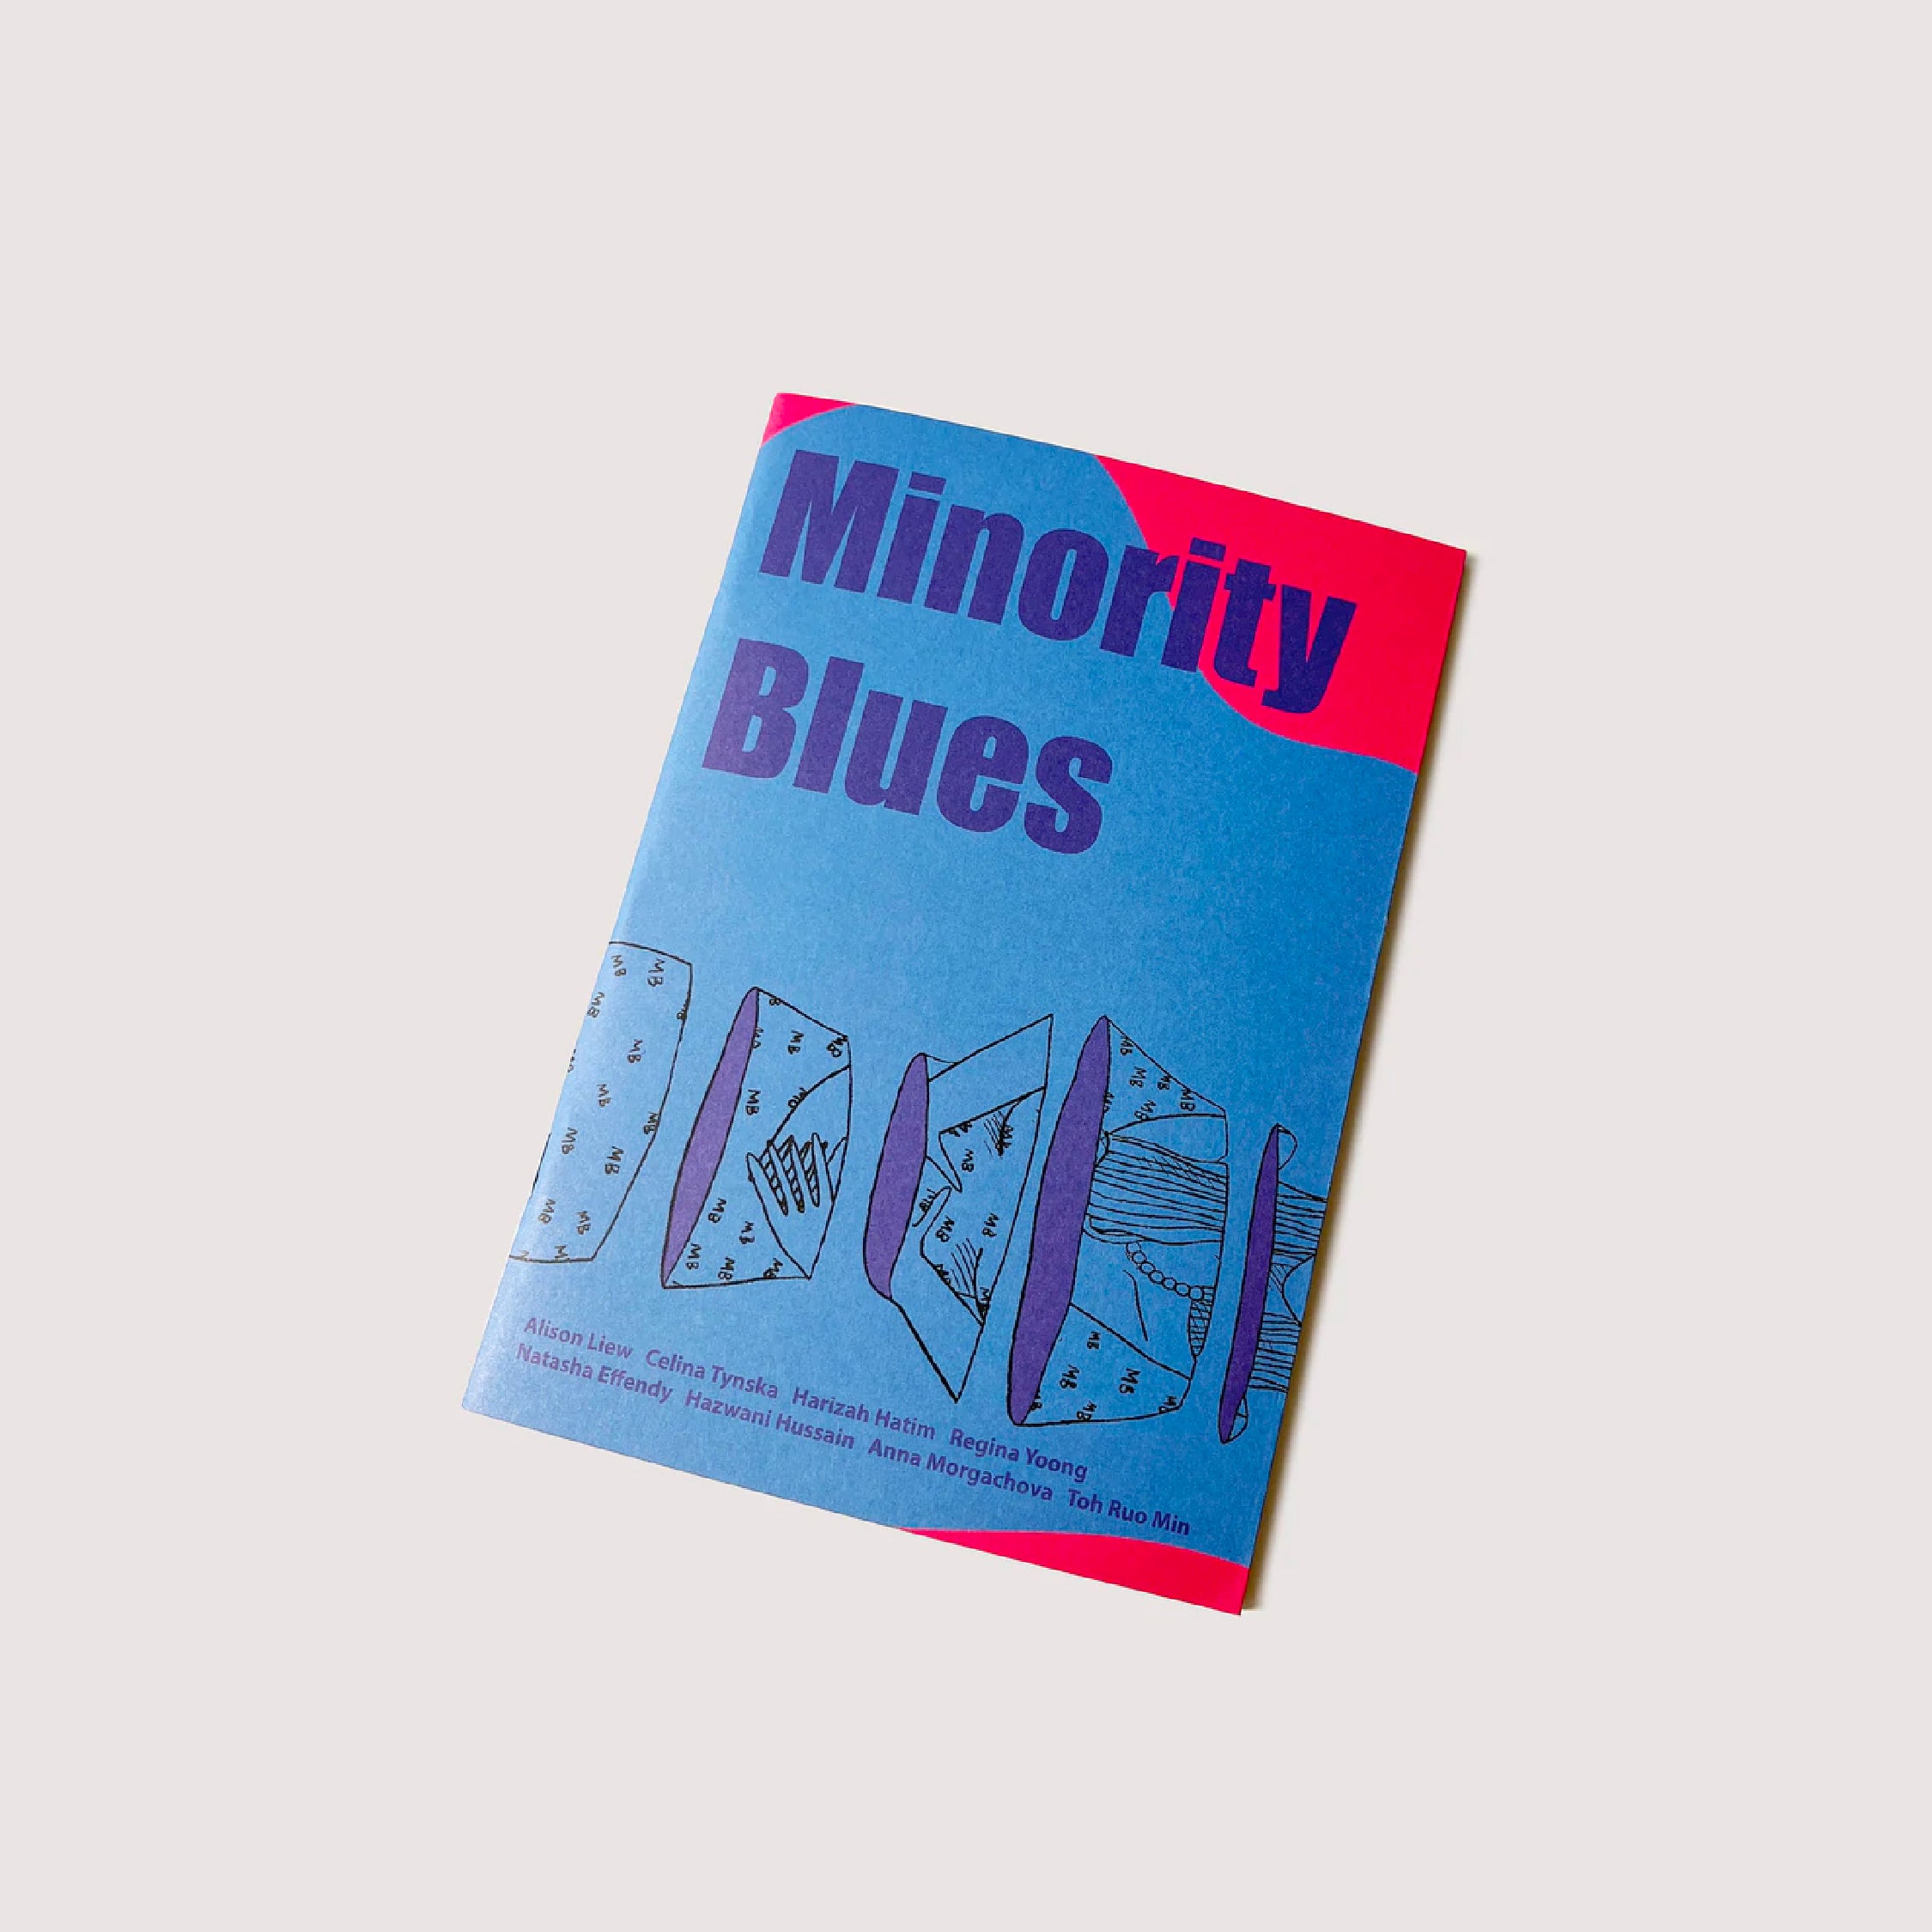 Minority Blues (short stories and poems)